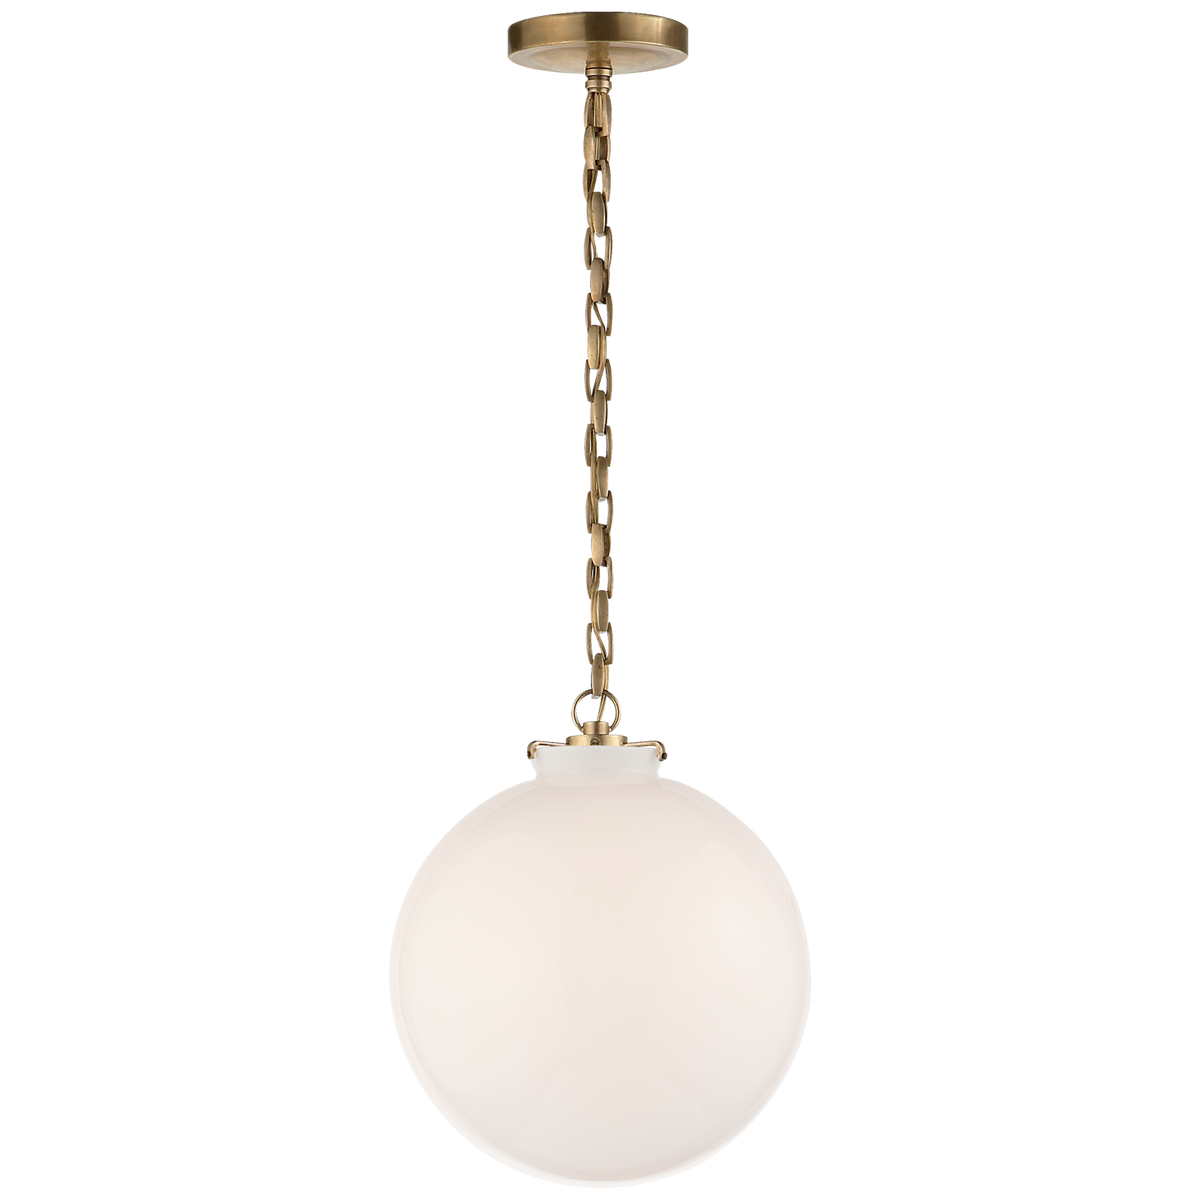 Katie Globe Pendant - Hand-Rubbed Antique Brass with White Glass